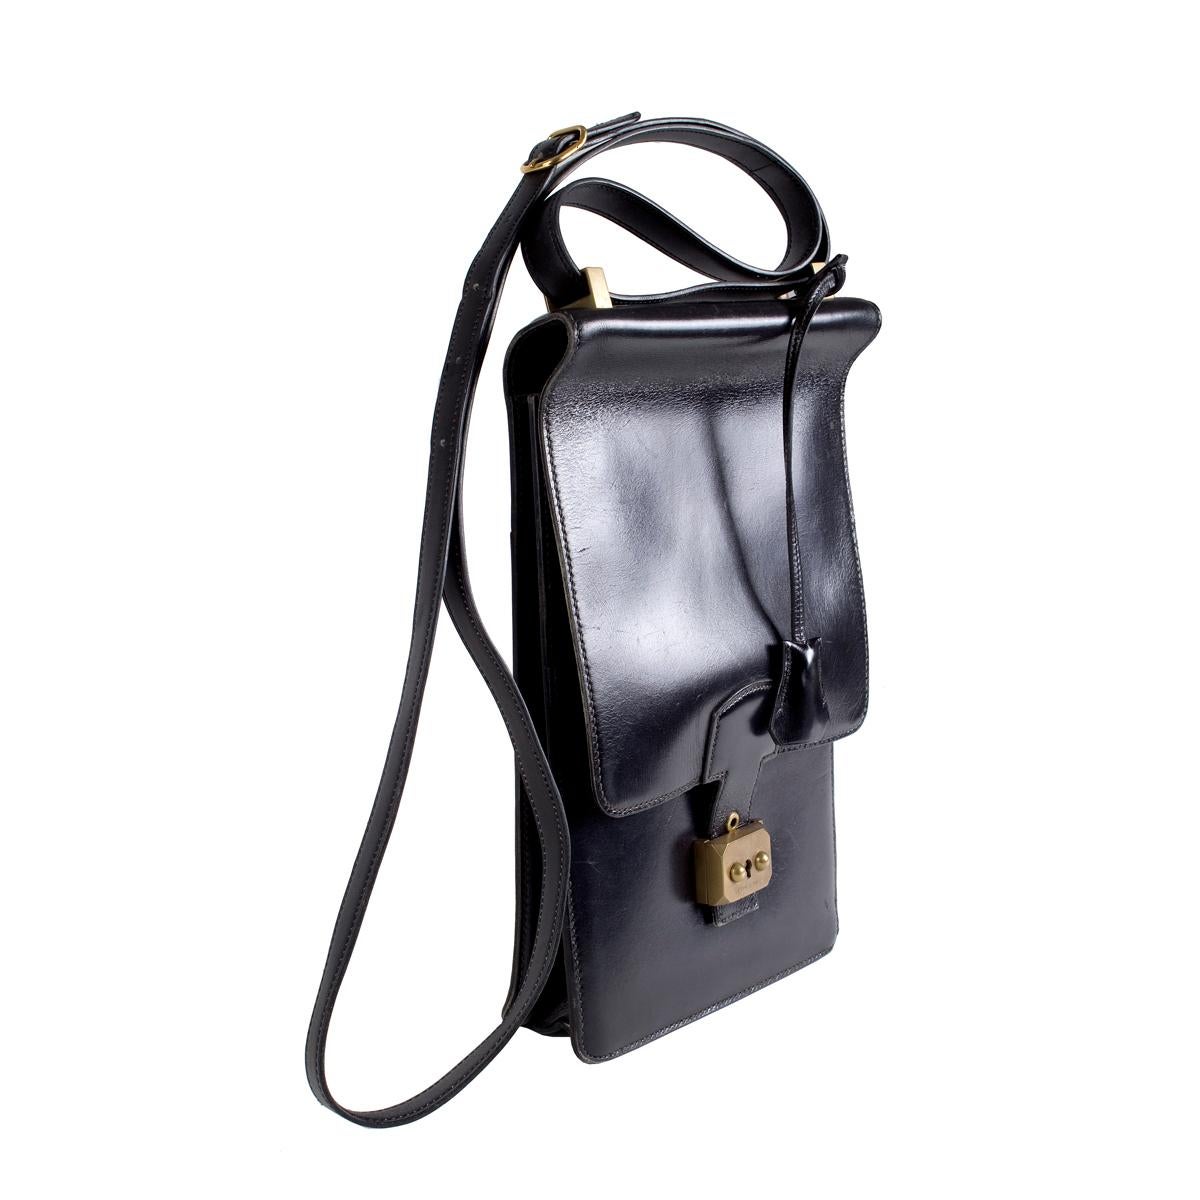 Bag by Hermes from 1983
Drawstring closure on top
Single shoulder strap that can be adjusted to either side
Dimensions:  20